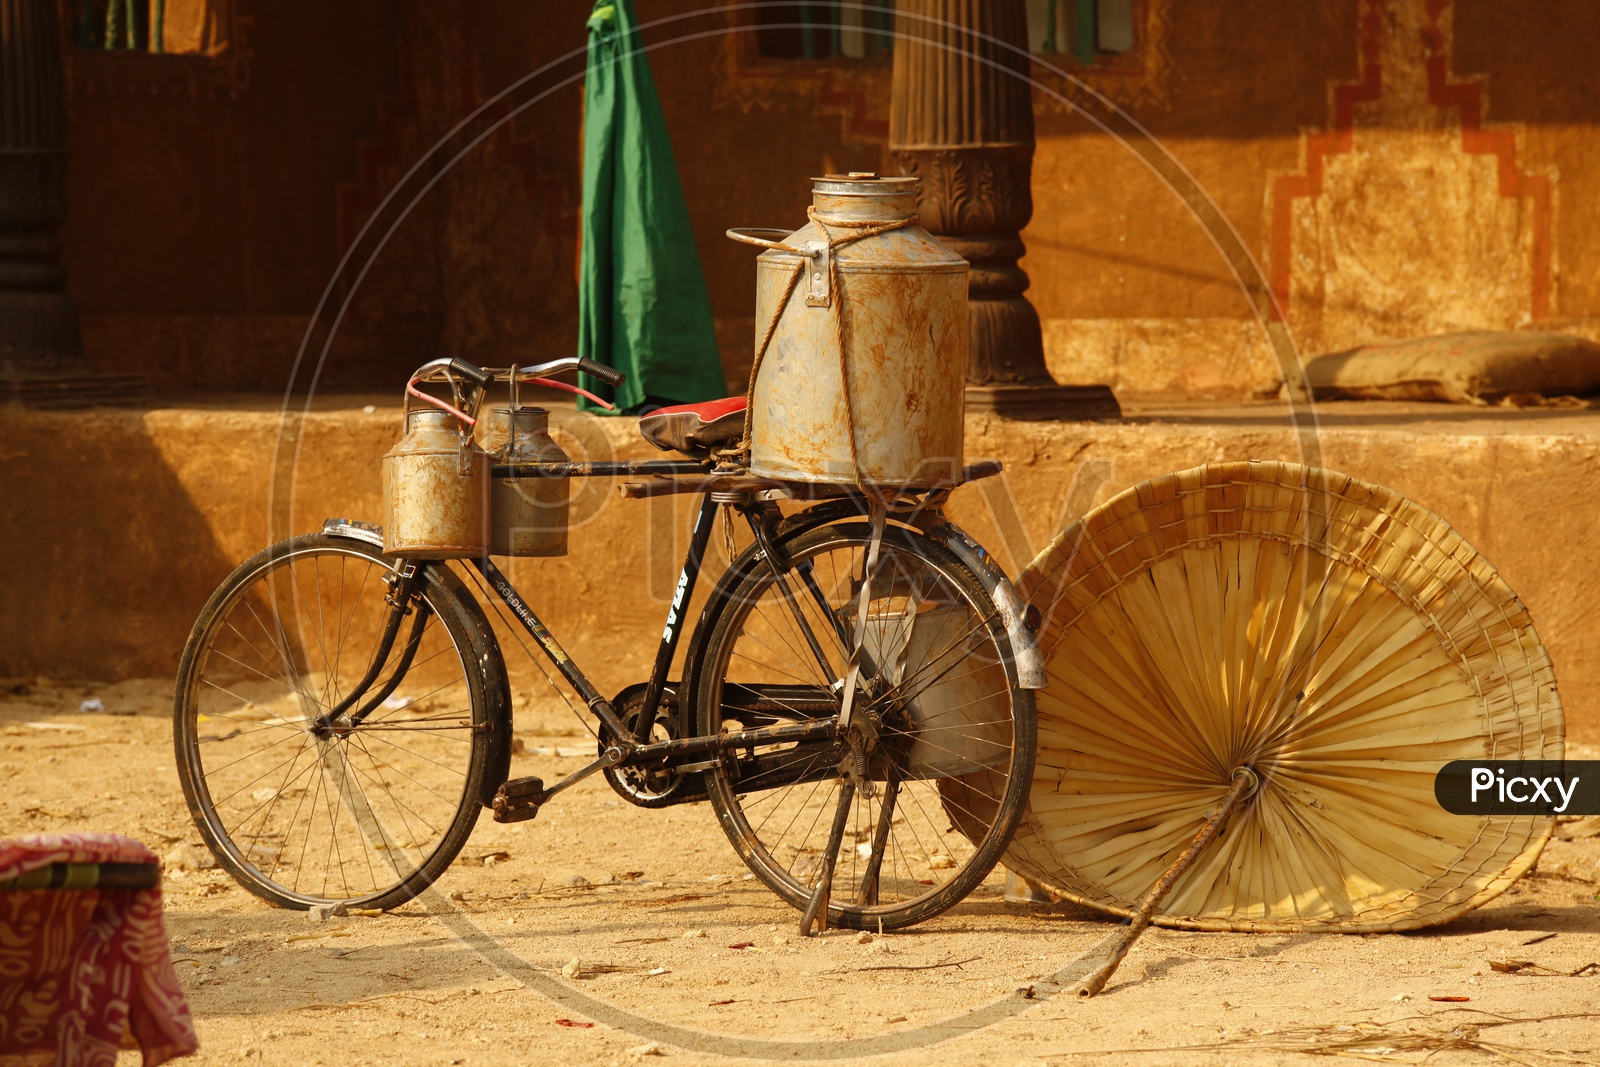 Milk Cans Tied on  Bicycle in Village